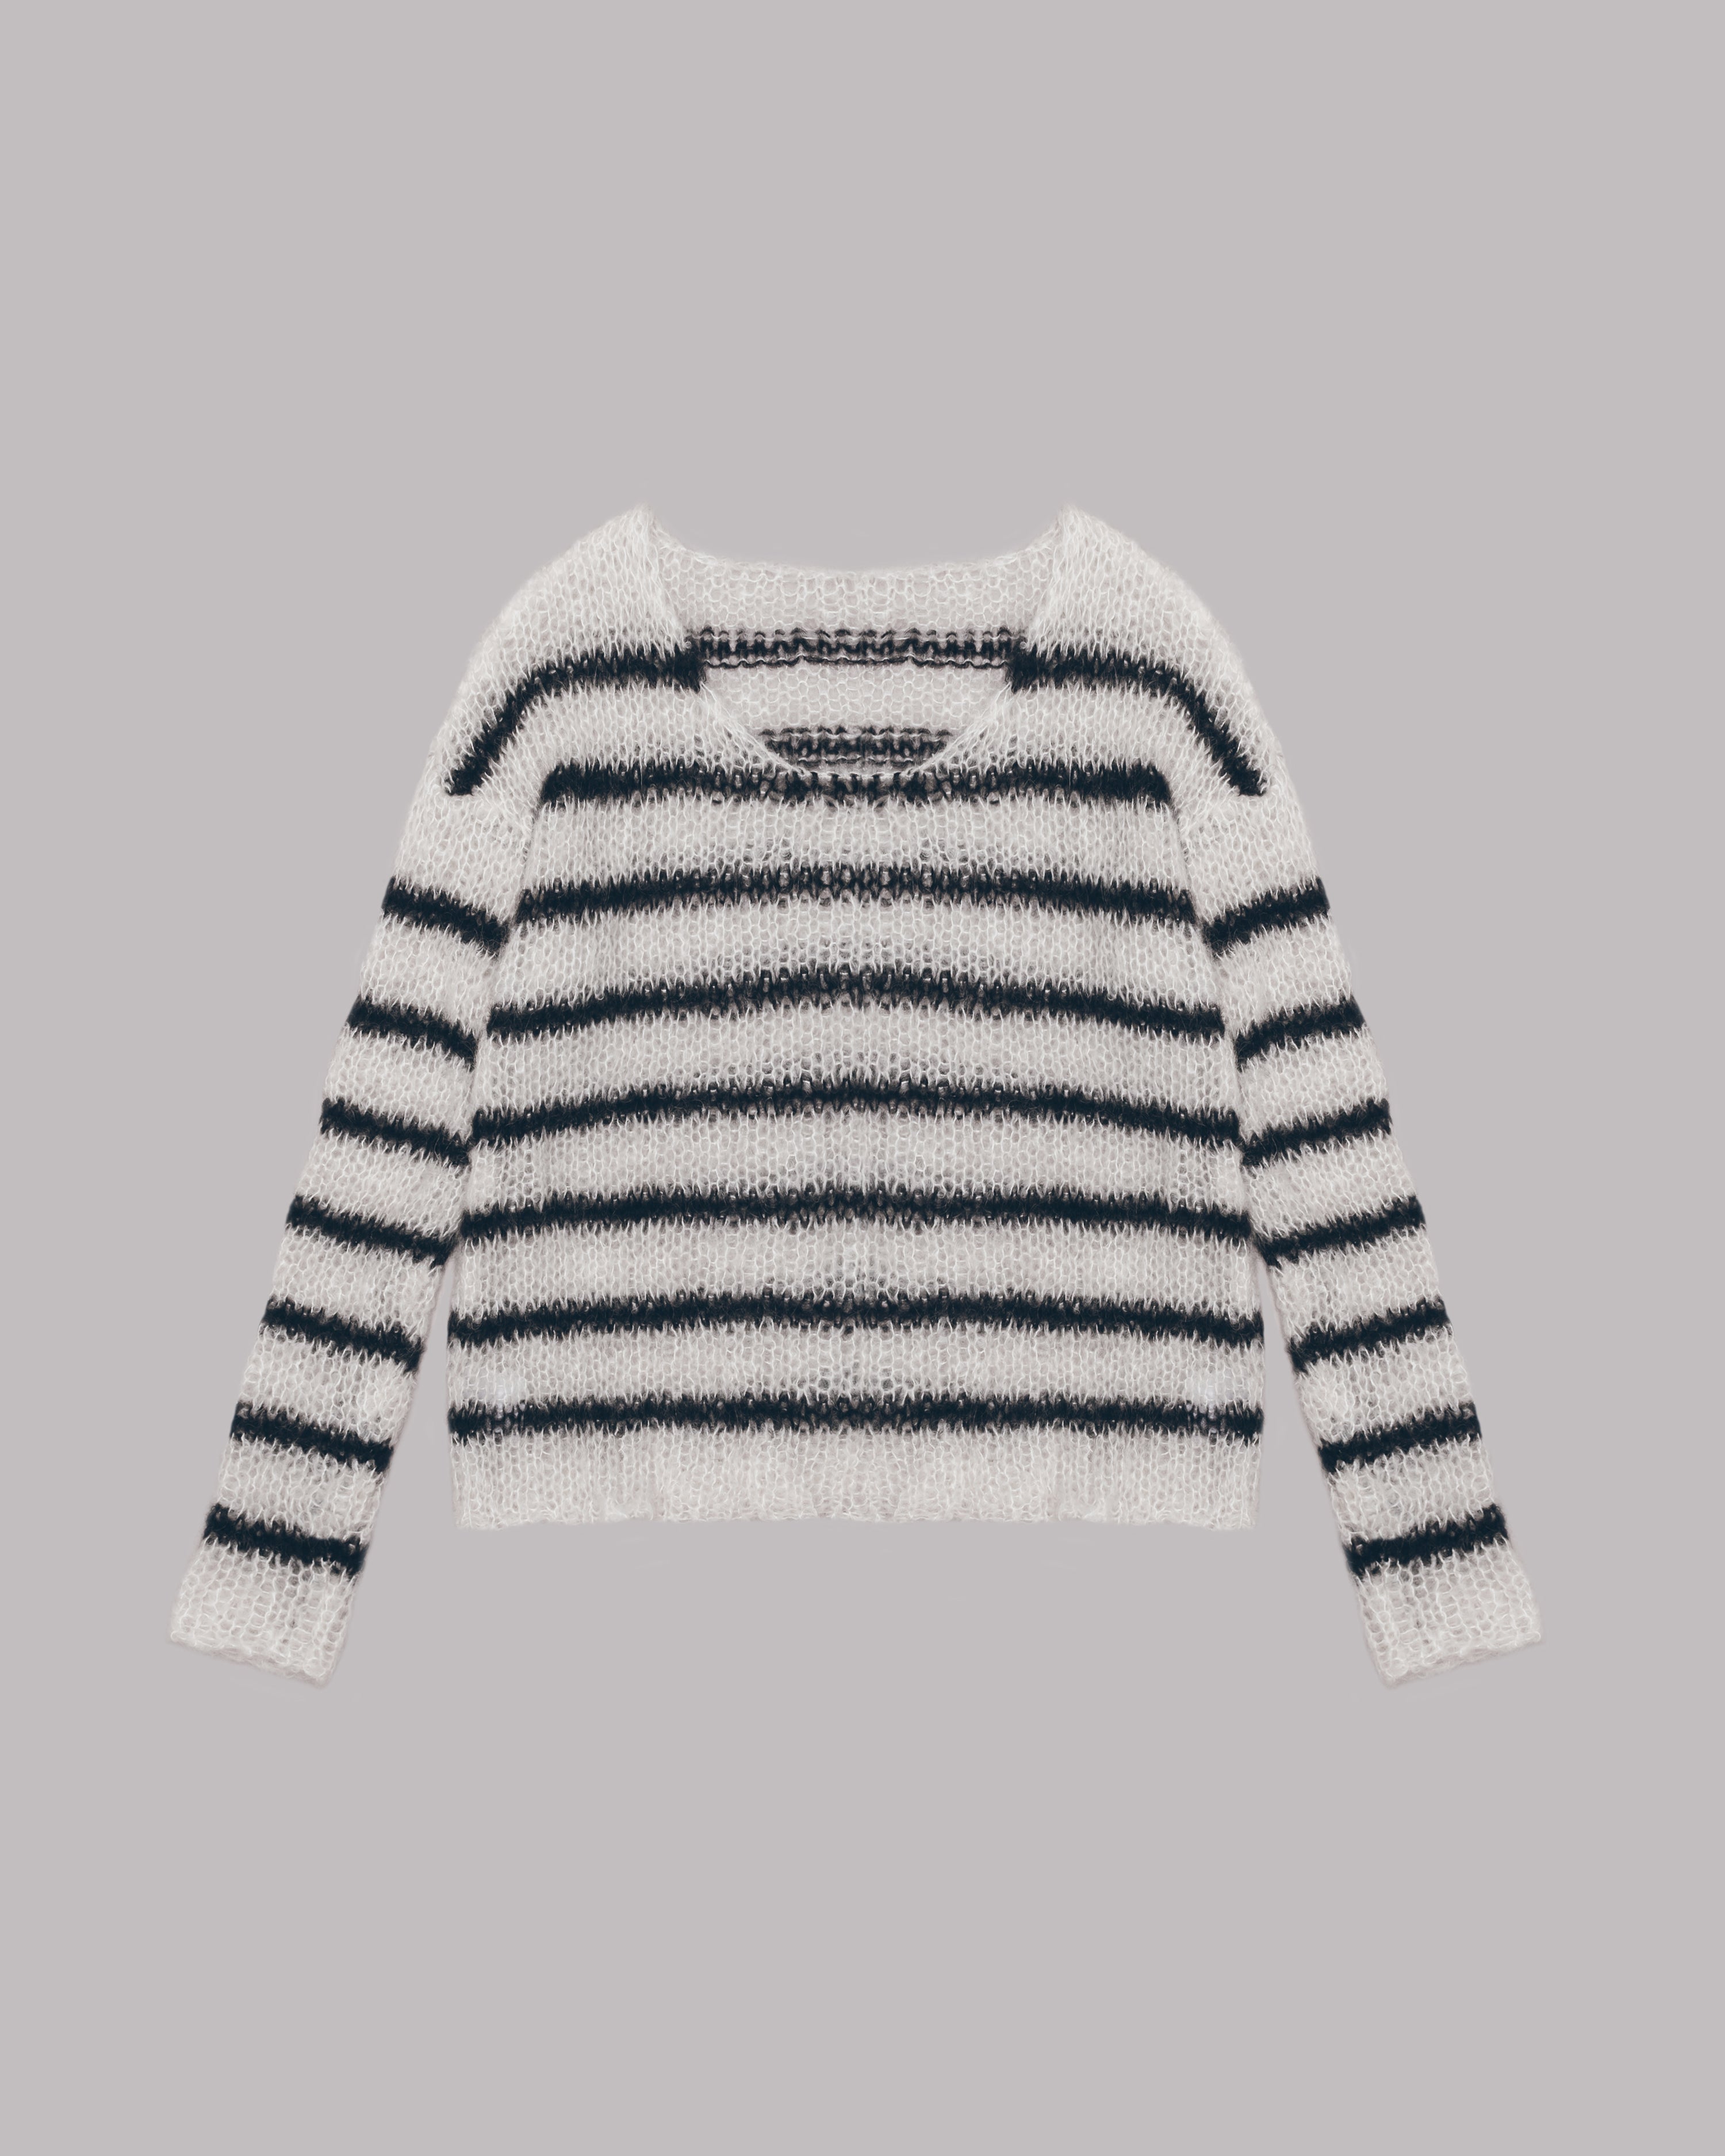 The Striped Mohair Knitted Sweater